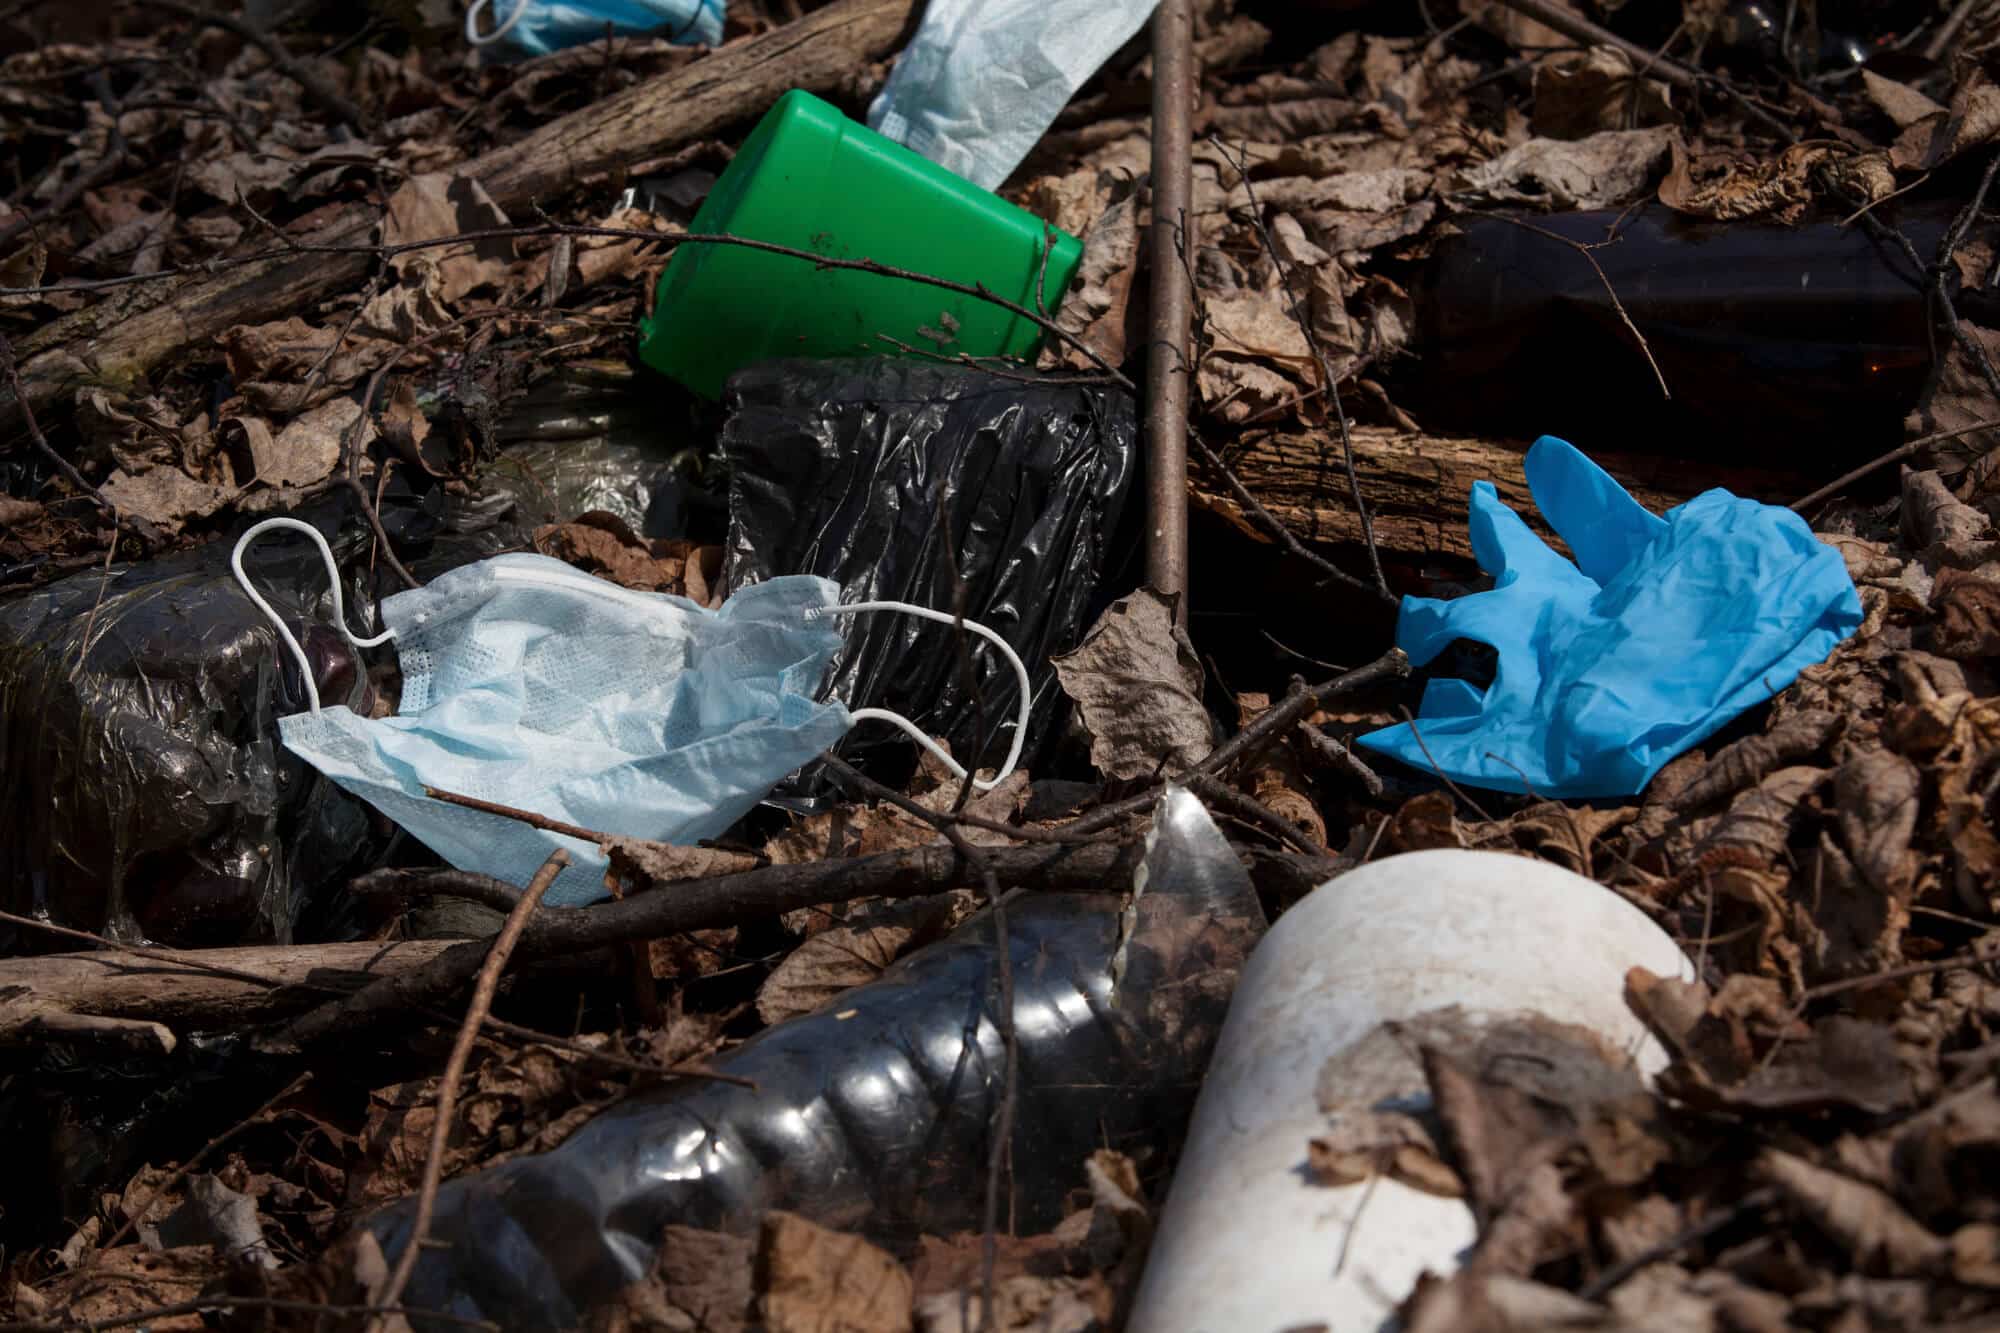 Plastic packaging waste. Used once, polluting for thousands of years. Image: depositphotos.com